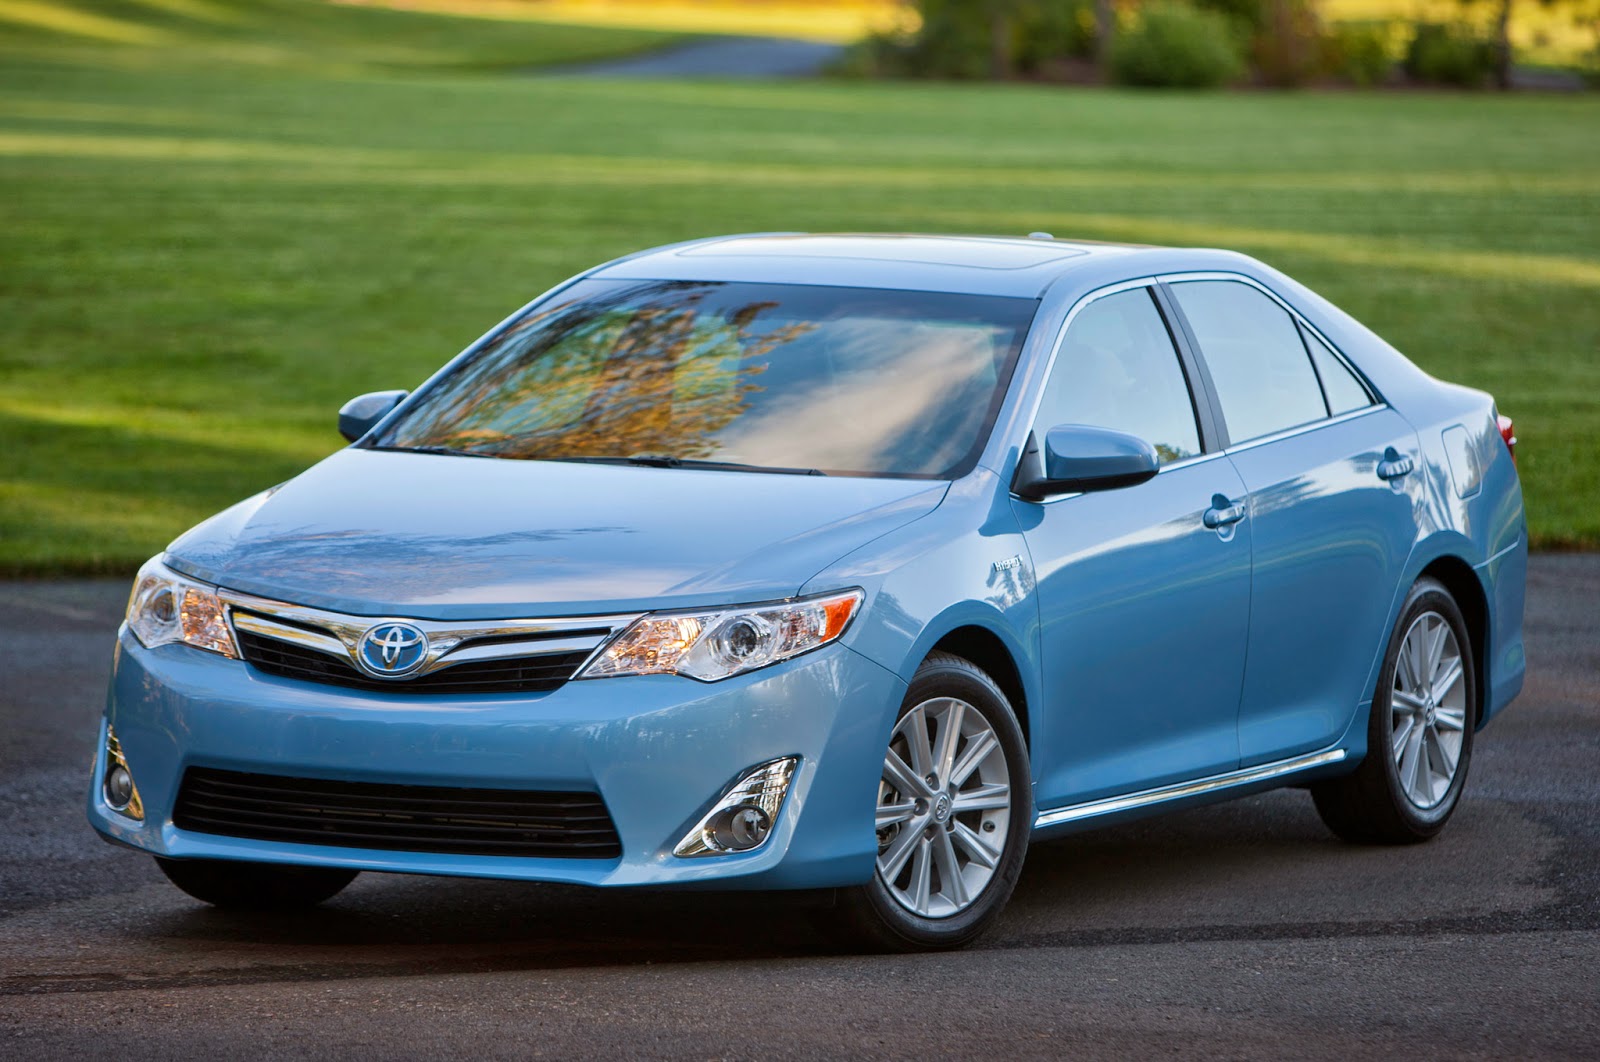 [ "aRie AfterLife BarKer" ]: Toyota Camry Mobil Hybrid Terbaik